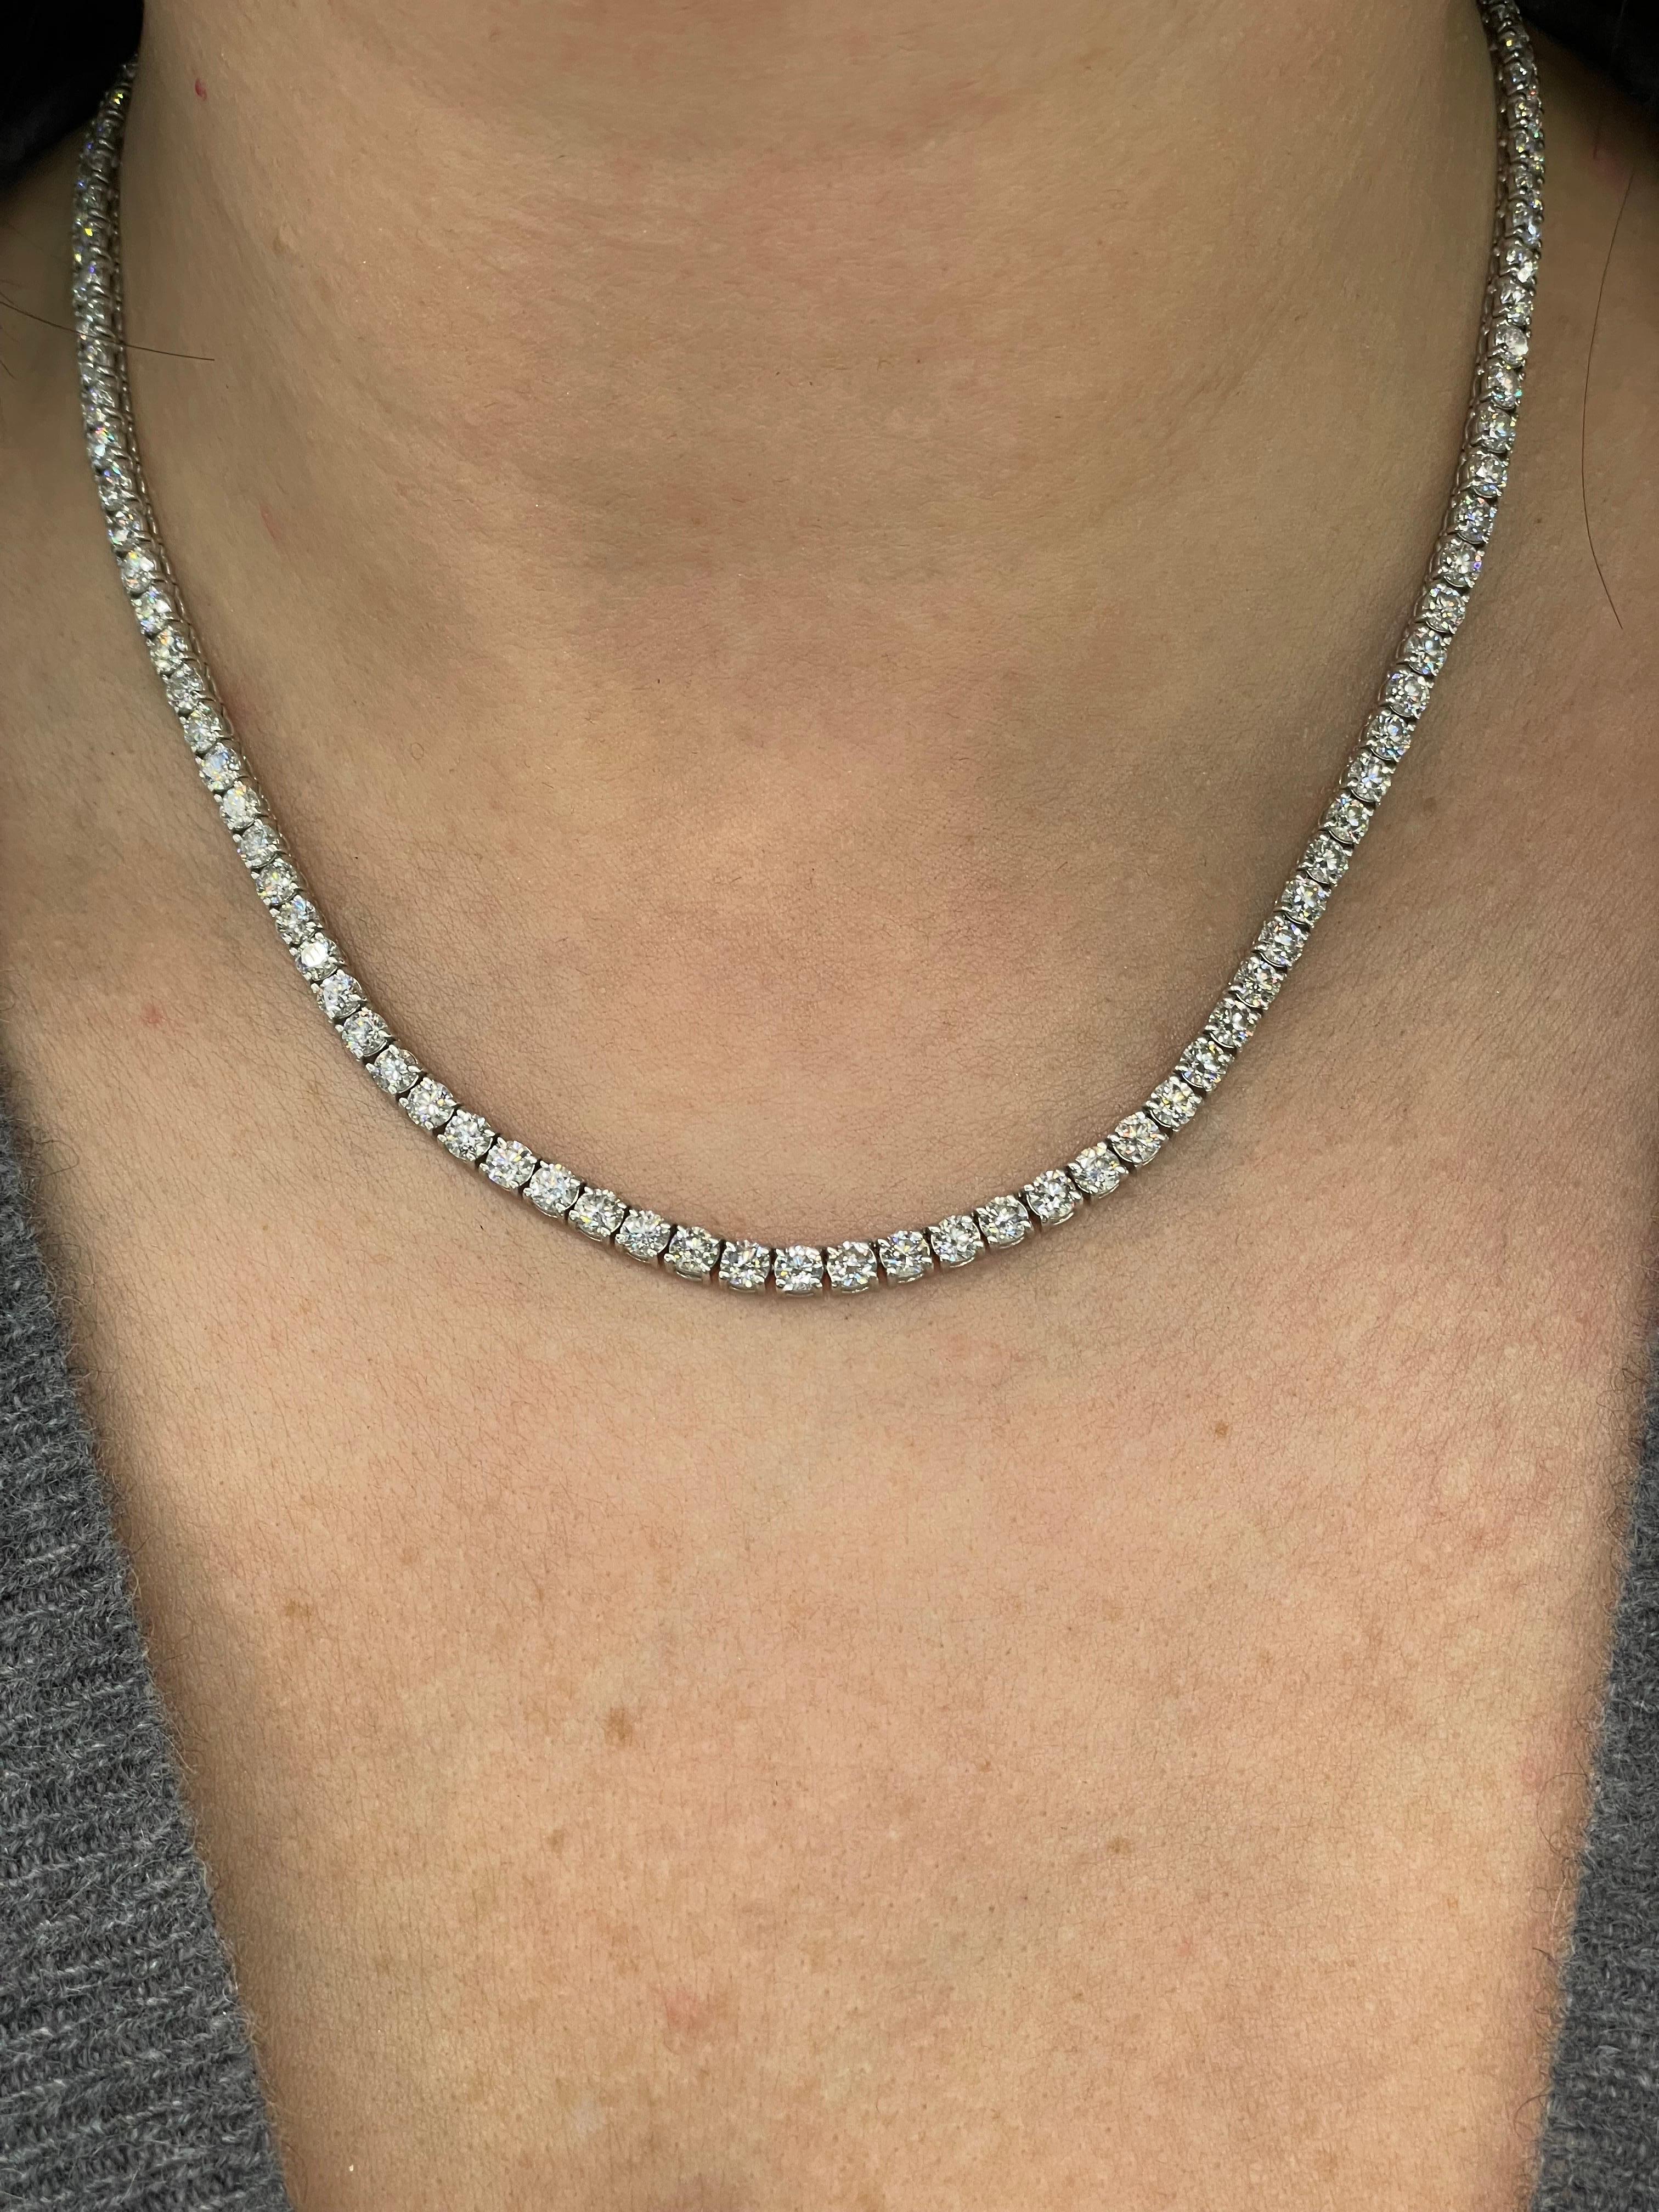 Round Cut Diamonds Straight Line Necklace 17.25 Carats 14k White Gold 0.15 PTS For Sale